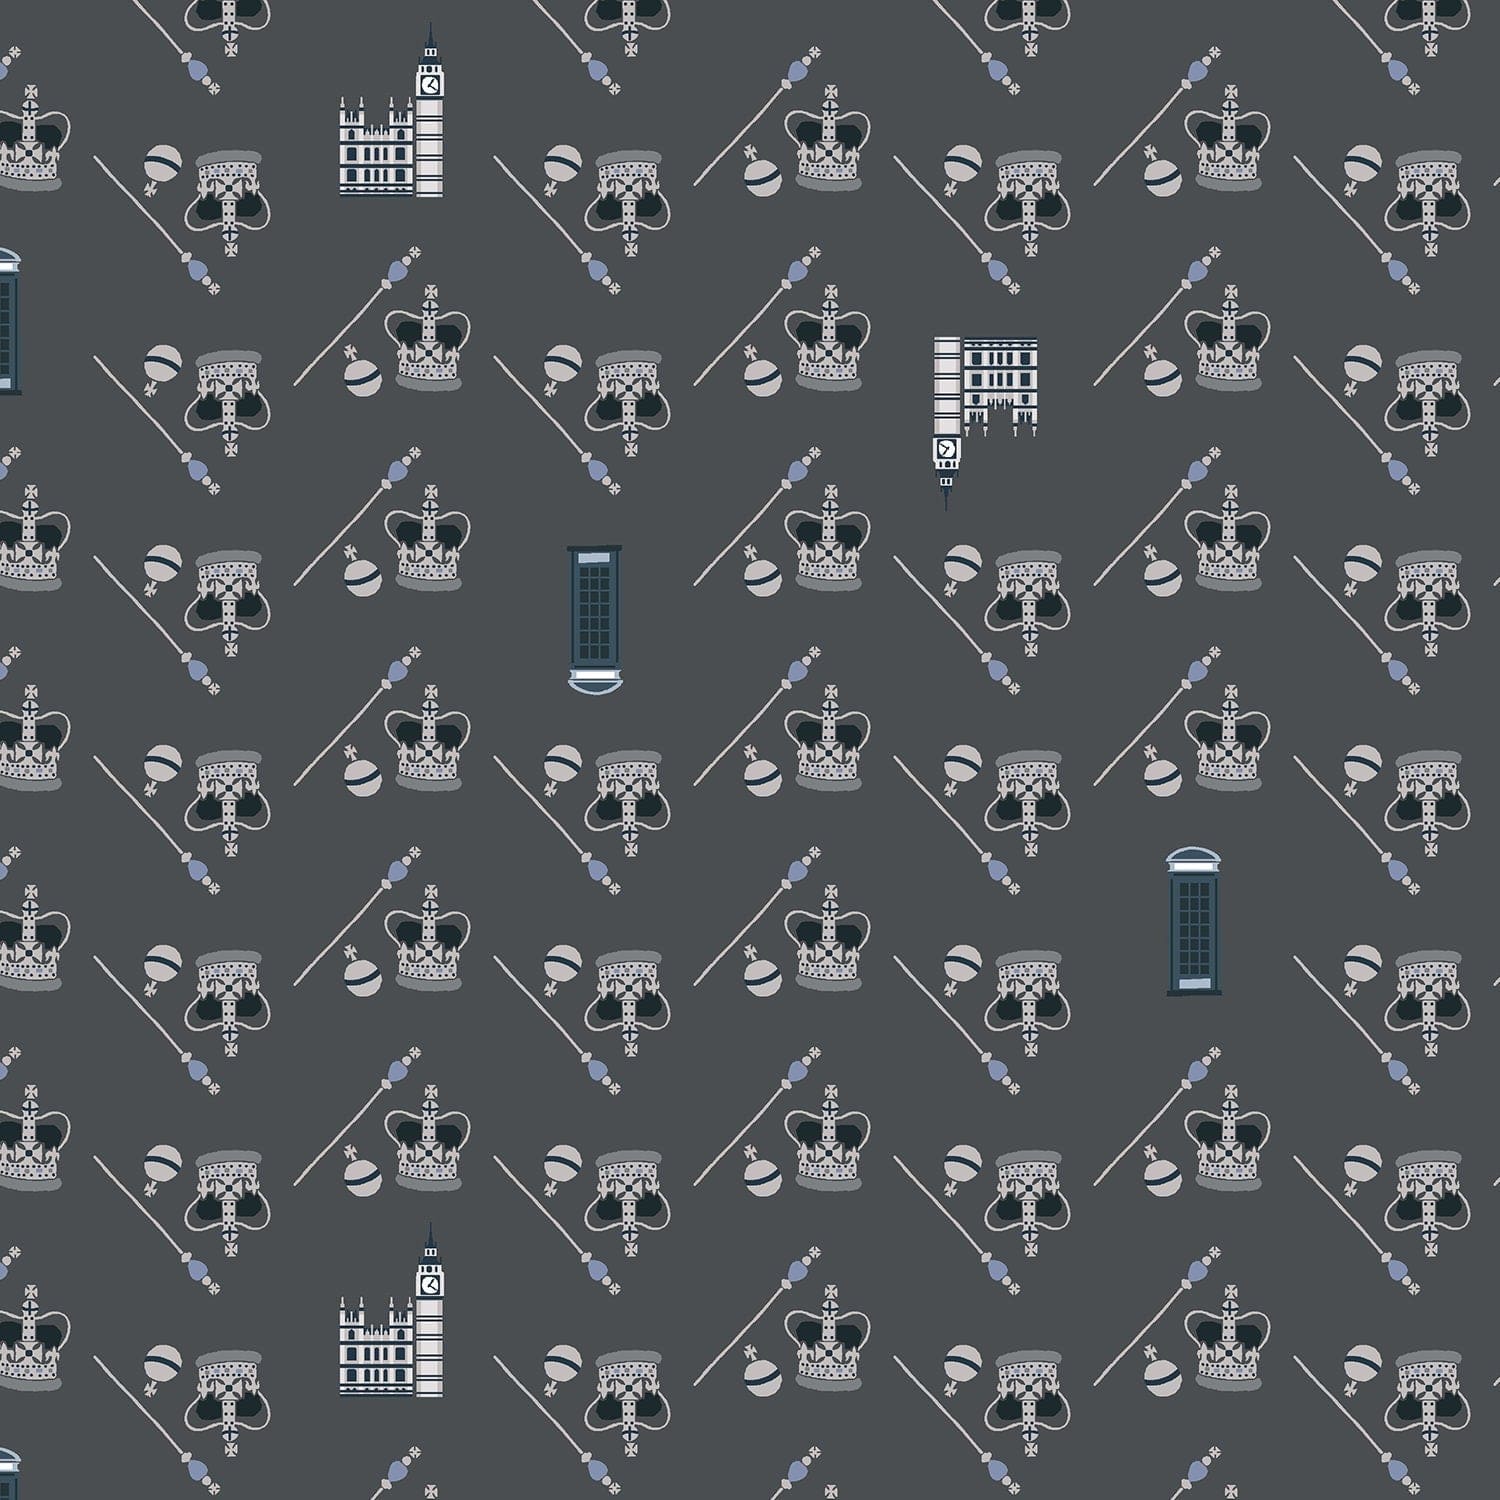 London Town HRH - Gray Fabric  - Gray - White - Blue - Sara Mulvanny -  Cotton + Steel - Quilting Cotton - SY104-GR2